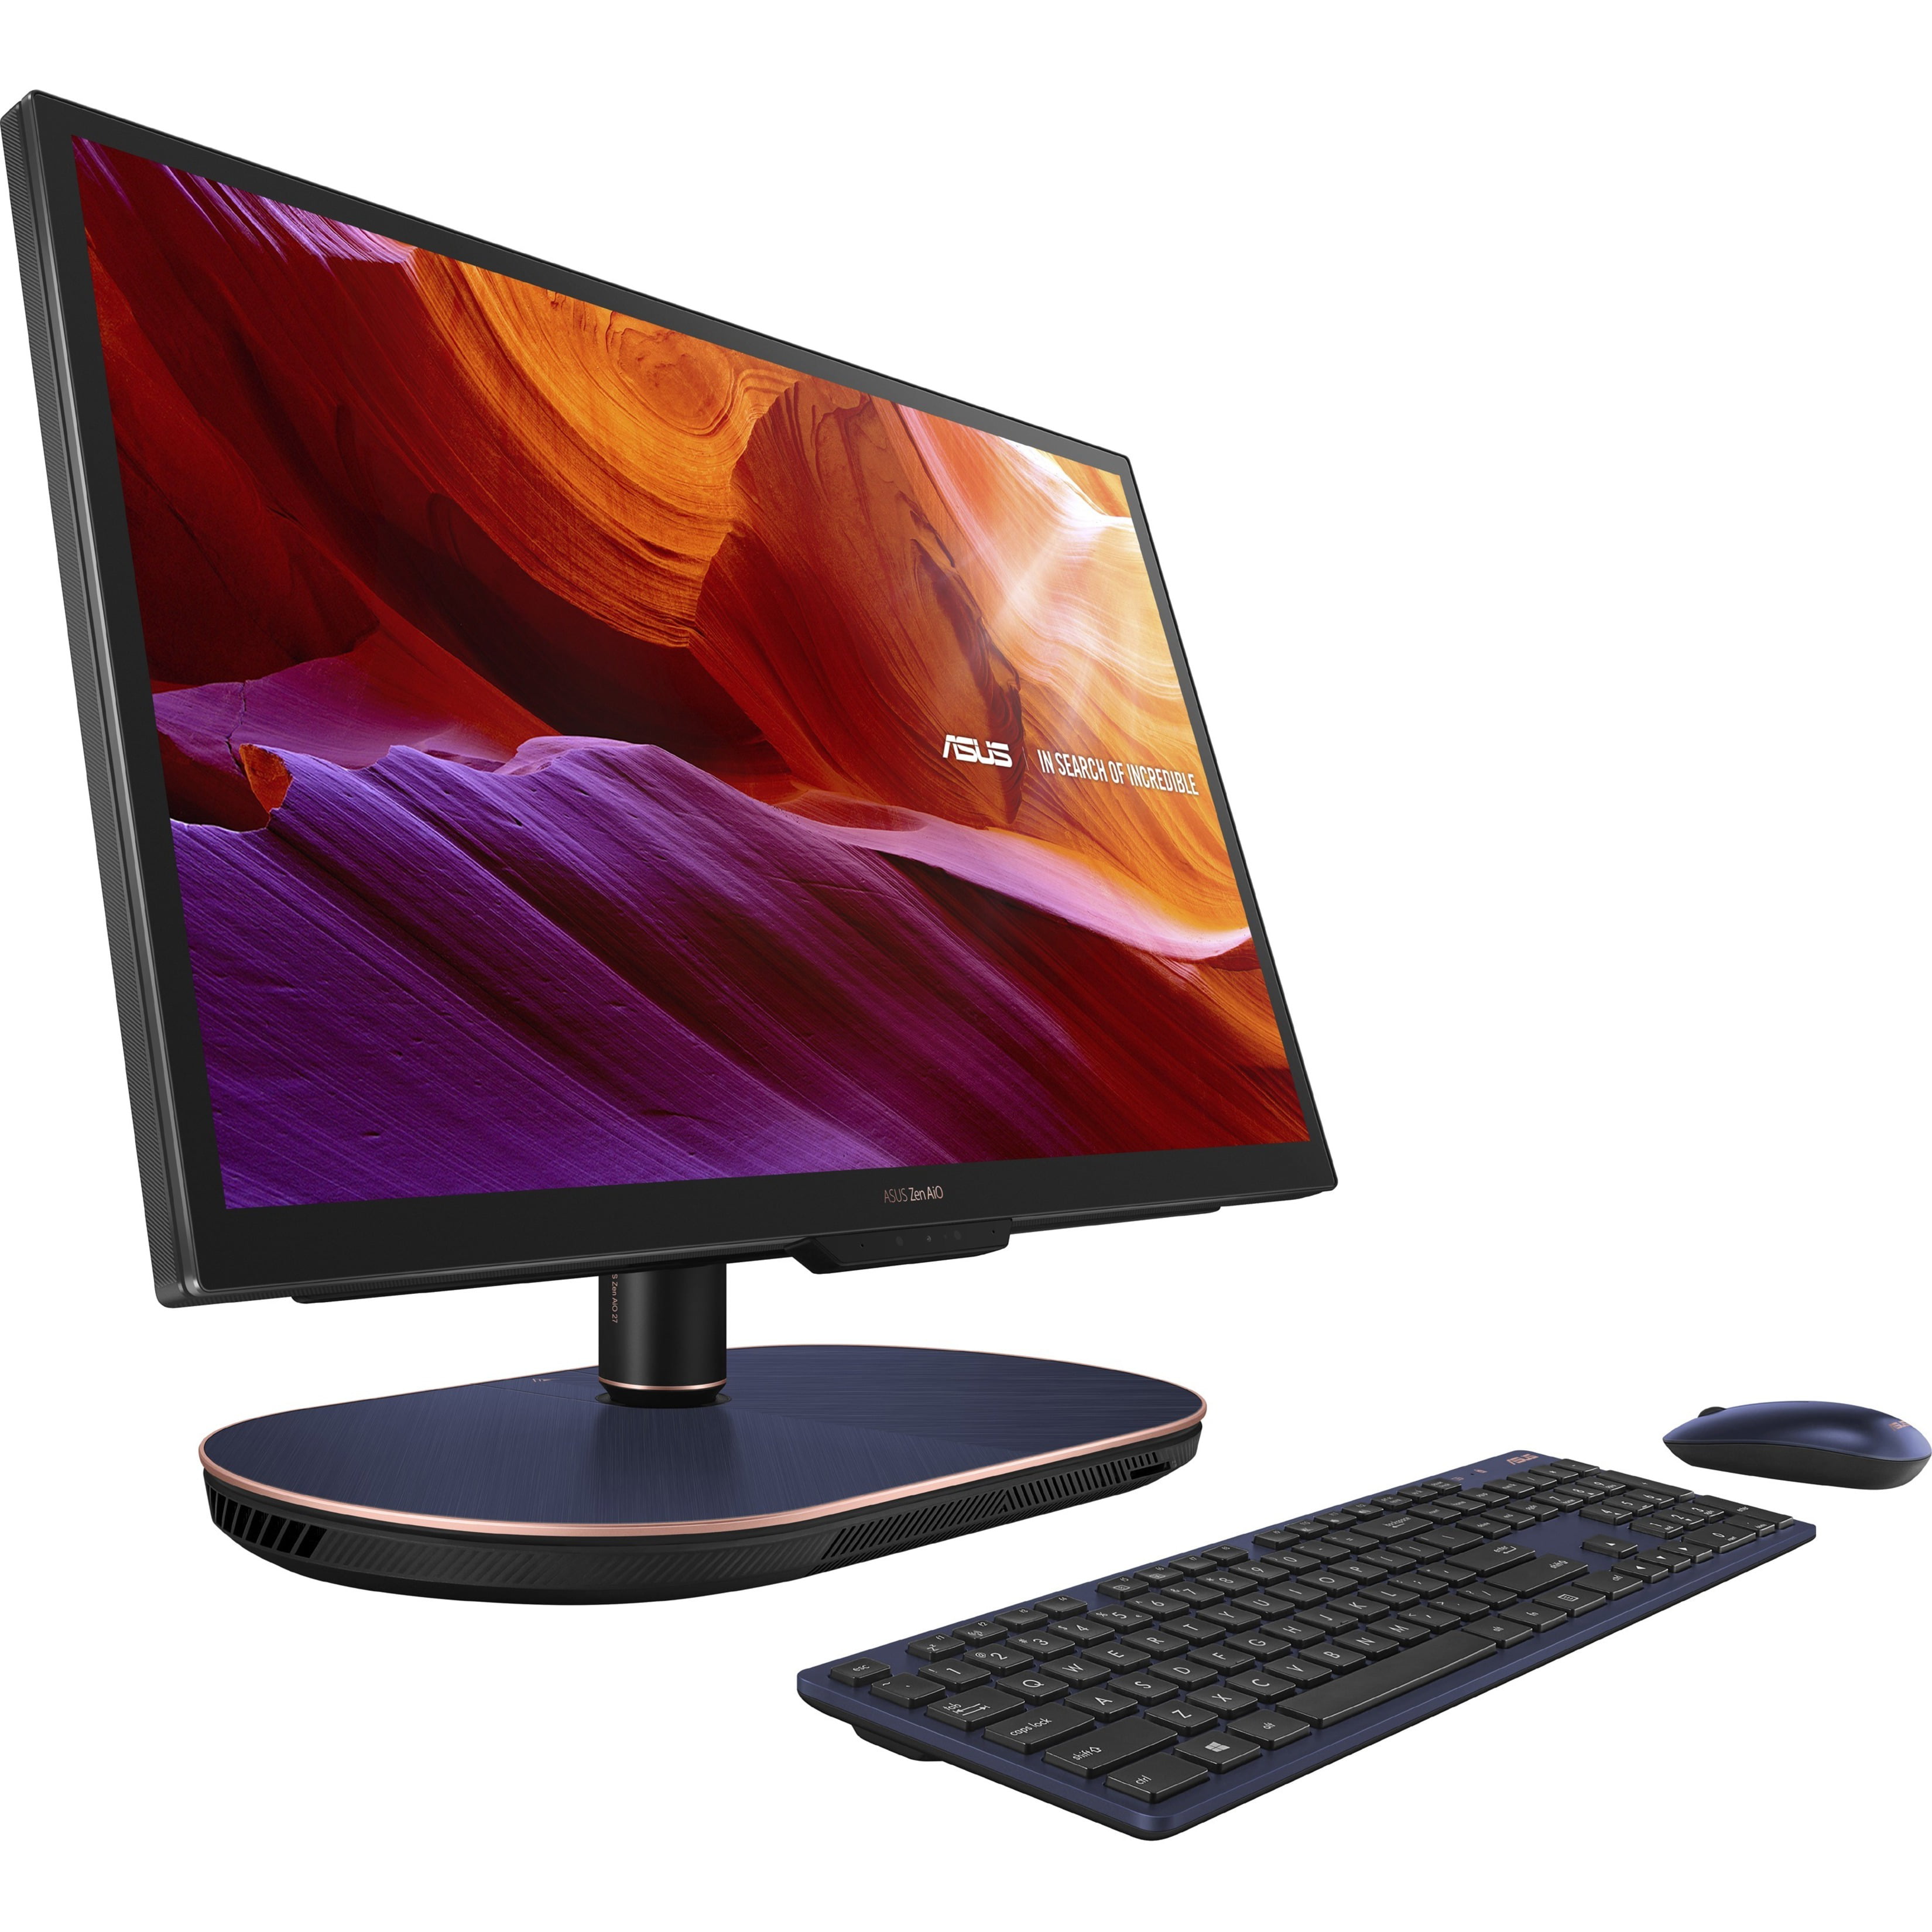 Asus Zen AiO Z272 Z272SD-XH751T - Intel Core i7-8700T - 16GB DDR4 SDRAM -  2512 GB SSD -NVIDIA GeForce GTX 1050 - Windows 10 Pro - All-in-One Computer  